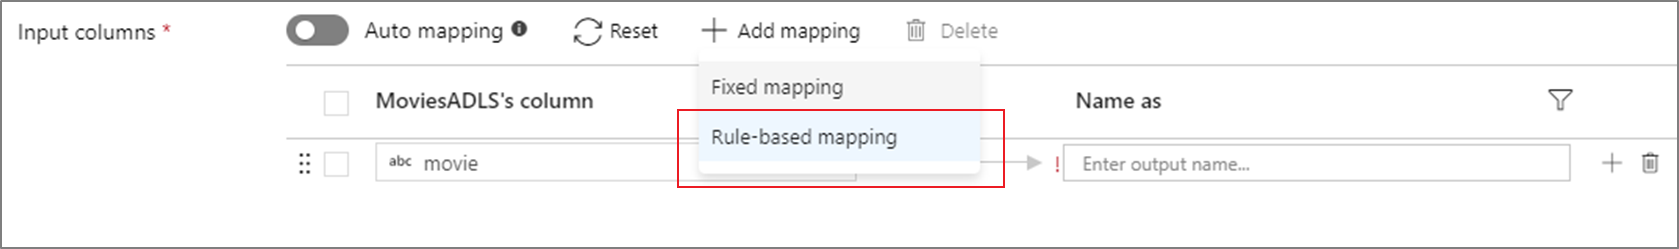 Screenshot shows Rule-based mapping selected from Add mapping.